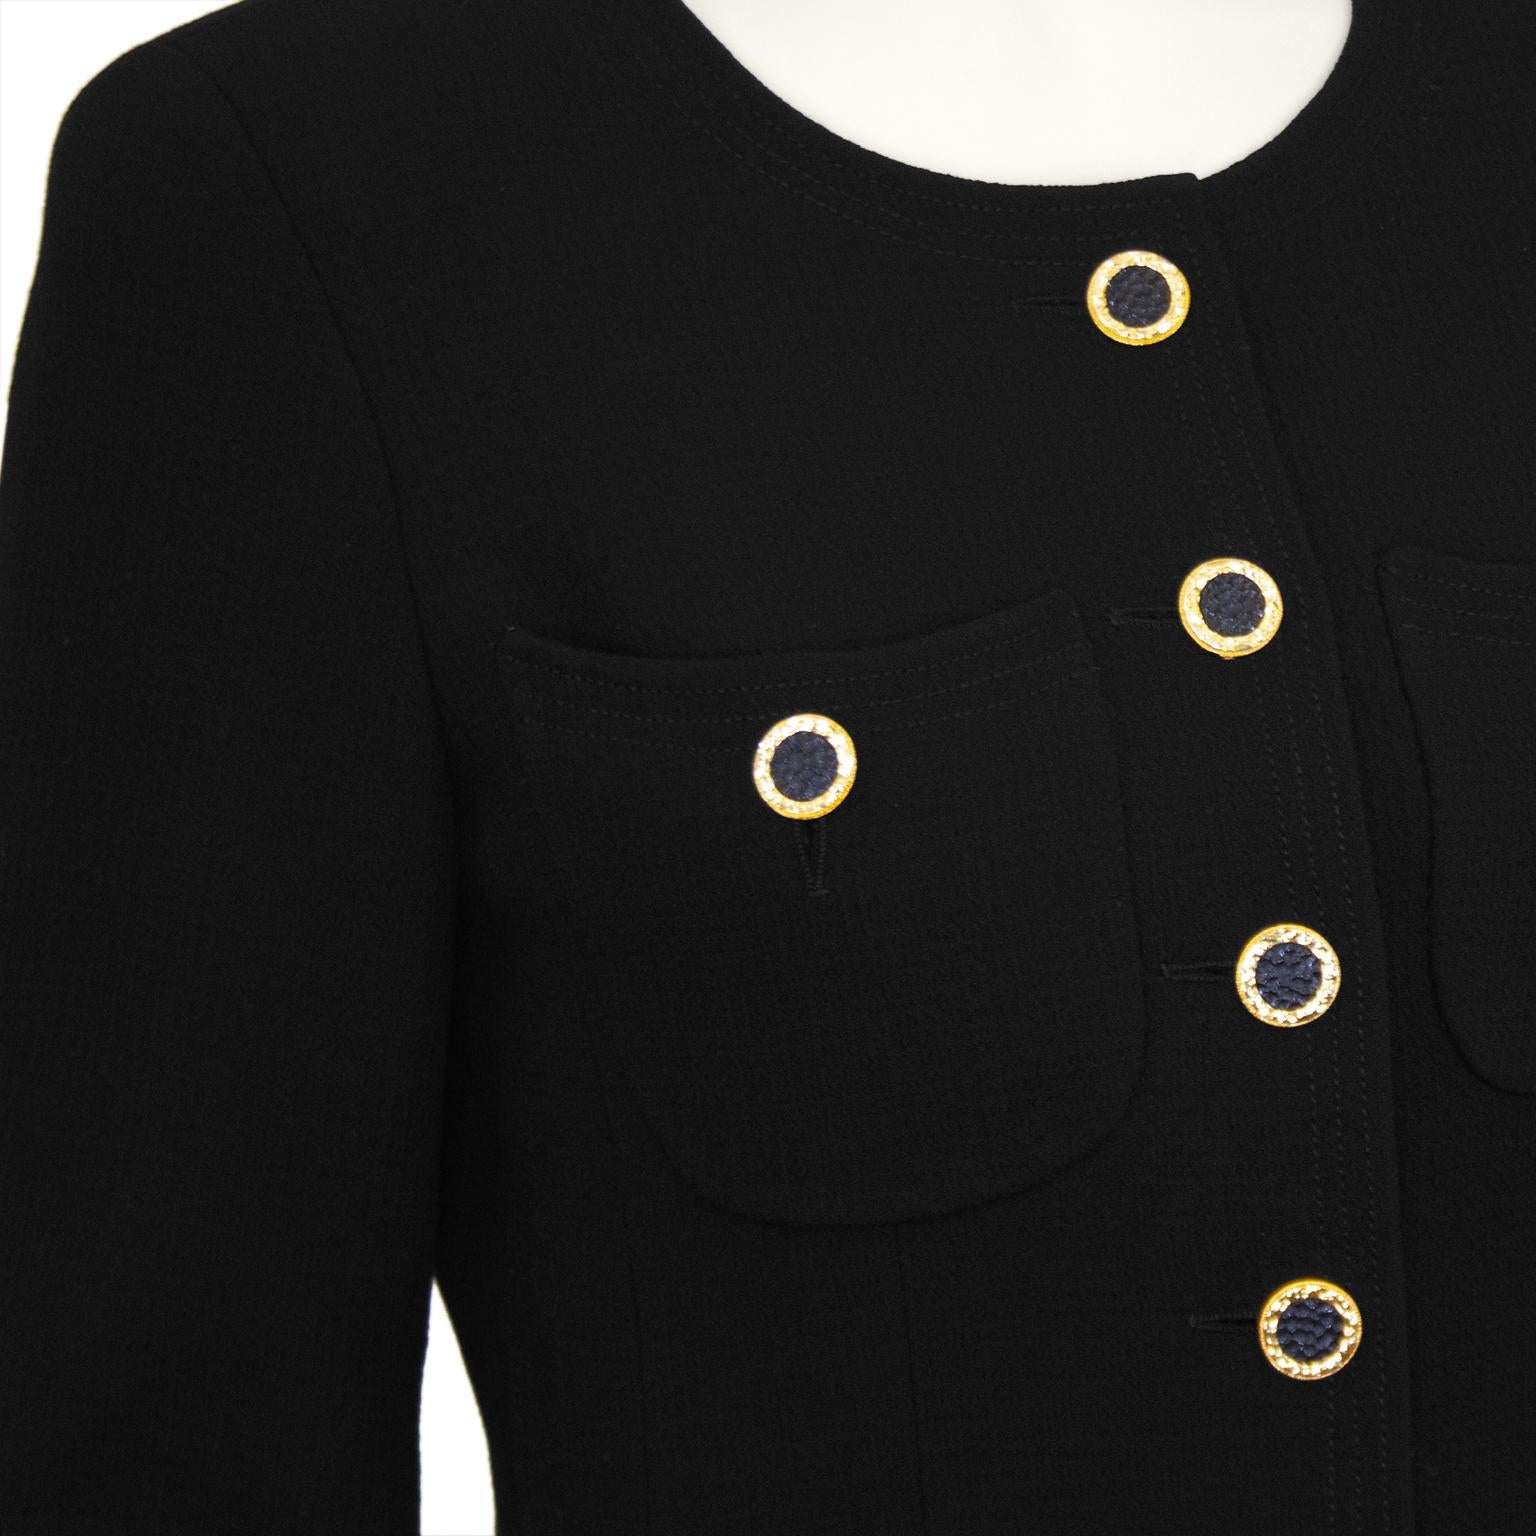 Women's 1990s Chanel Black Collarless Jacket with Gold Buttons For Sale